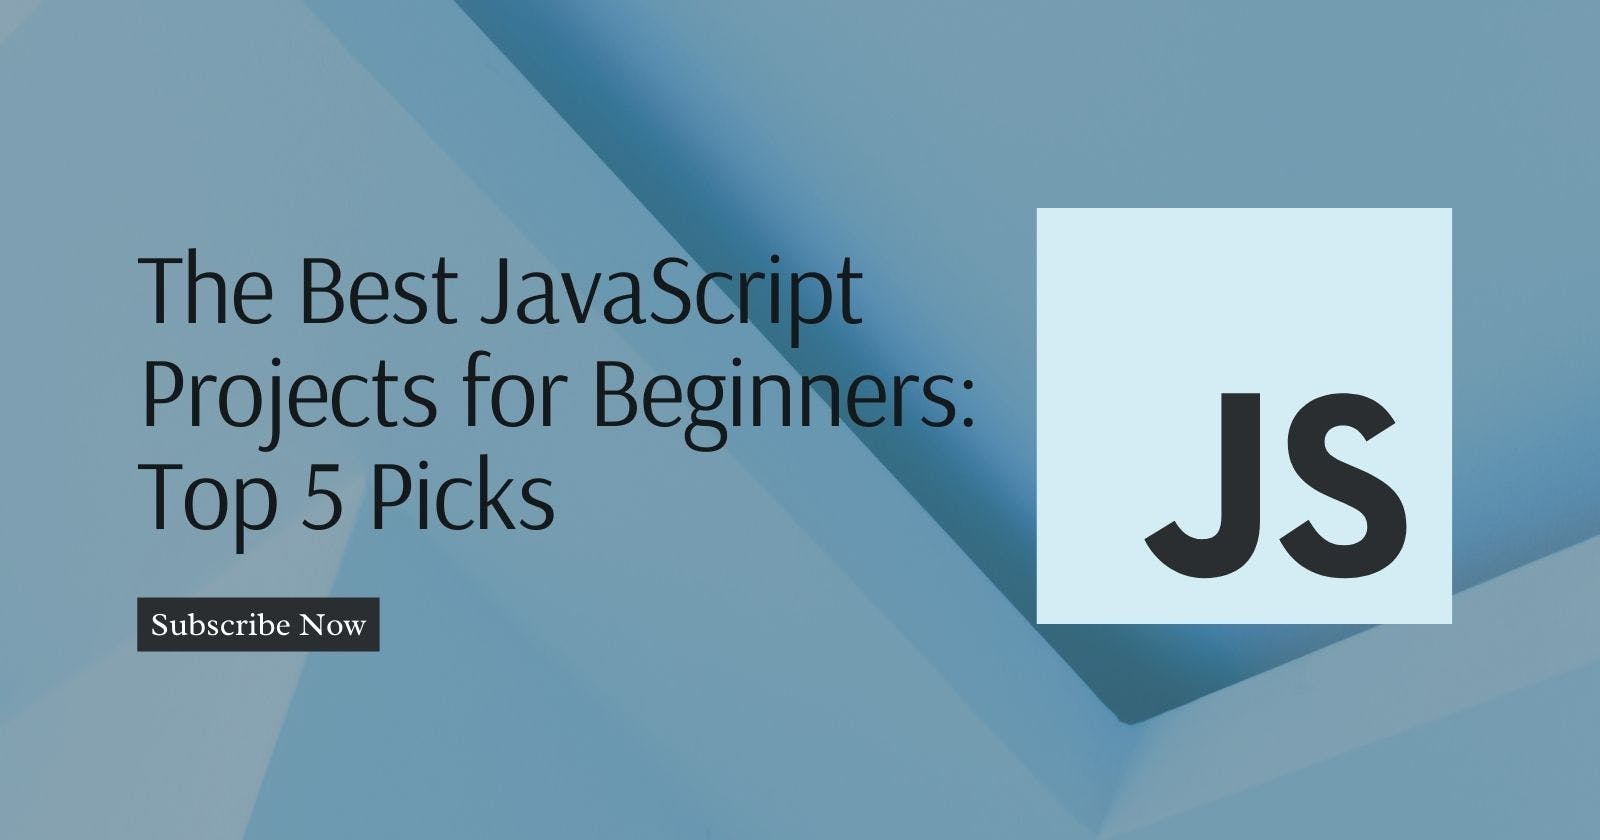 The Best JavaScript Projects for Beginners: Top 5 Picks